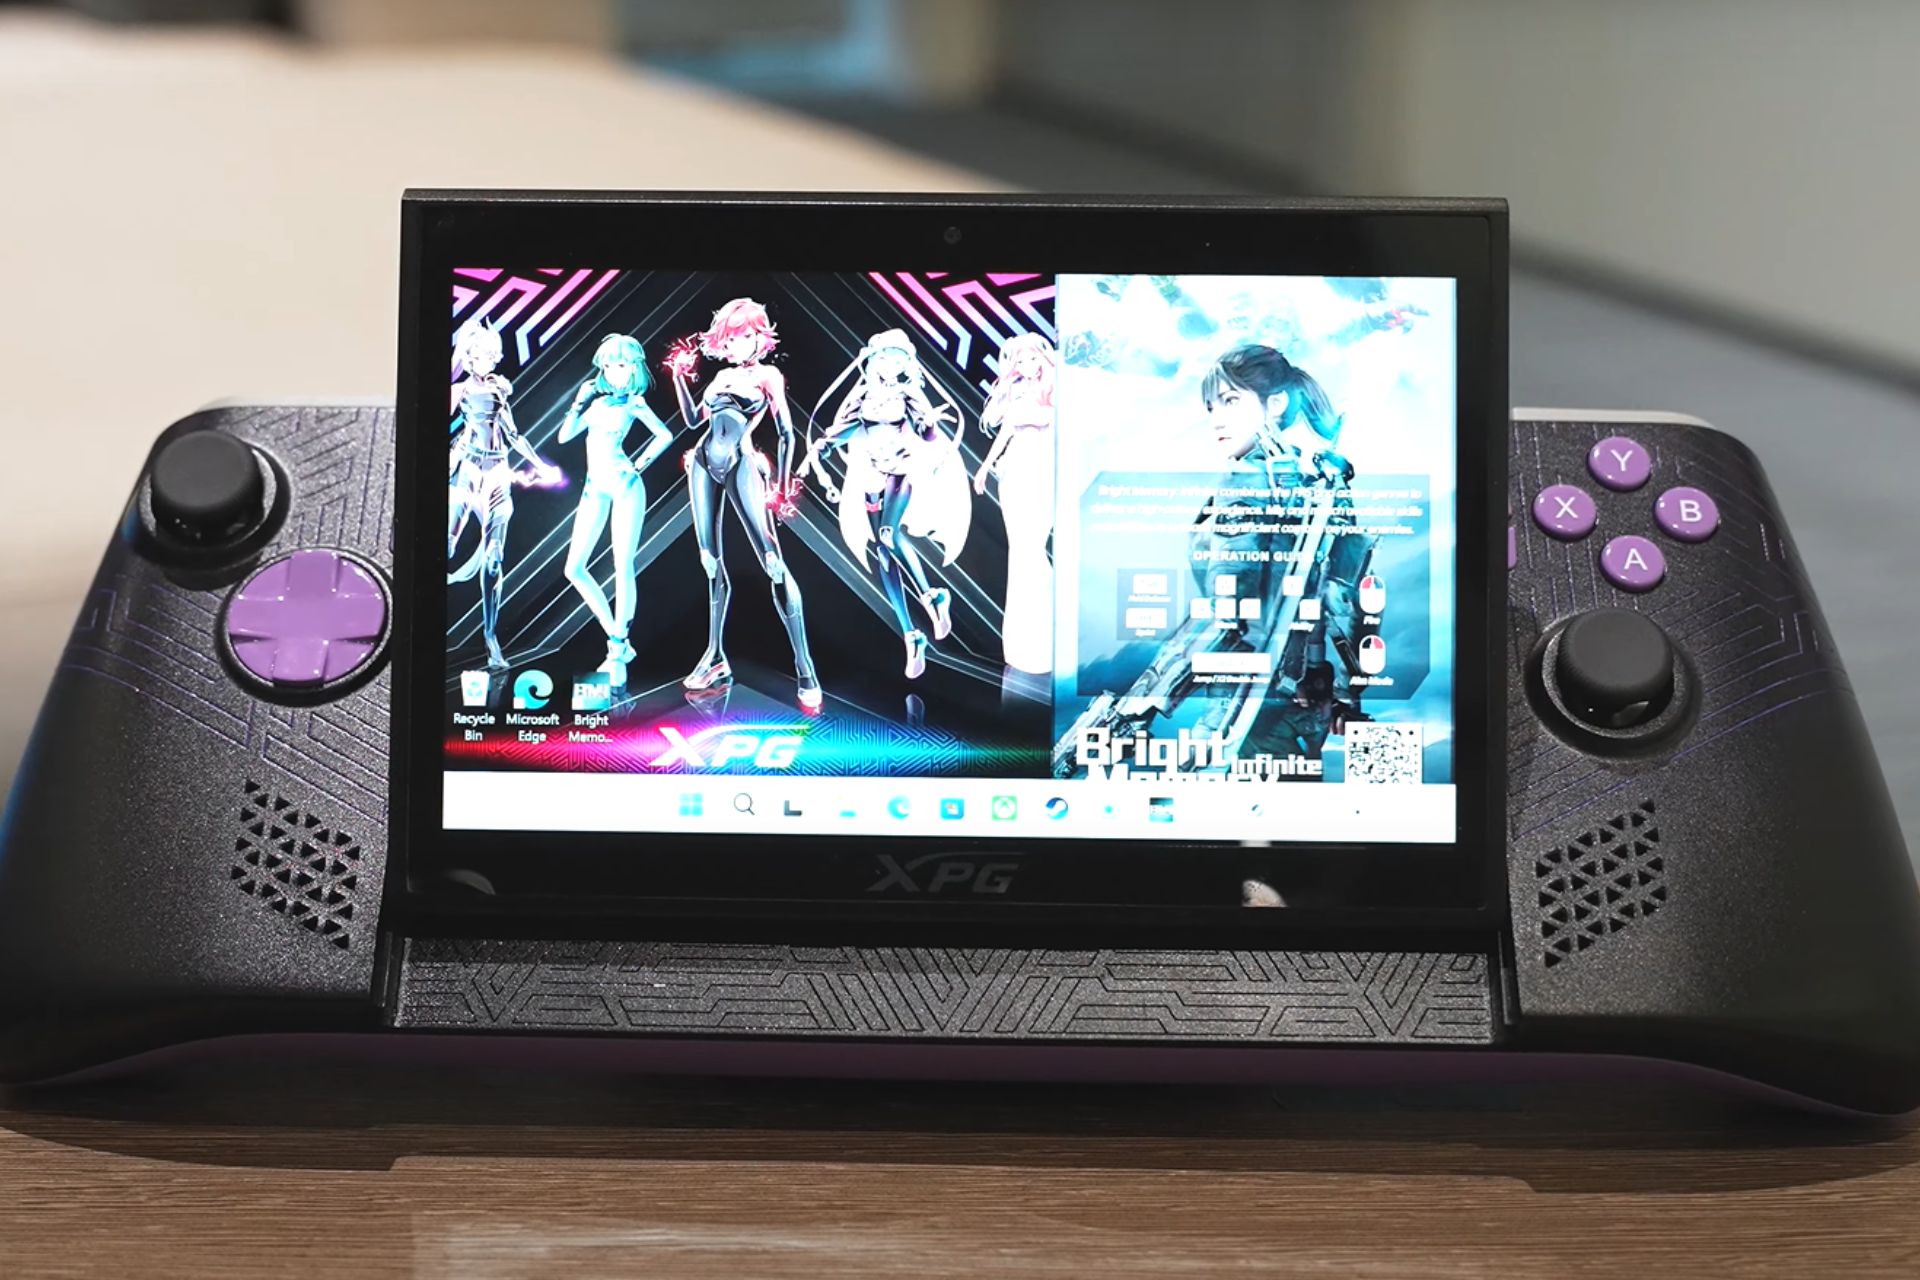 The new XPG Nia handheld console is capable of foveated rendering